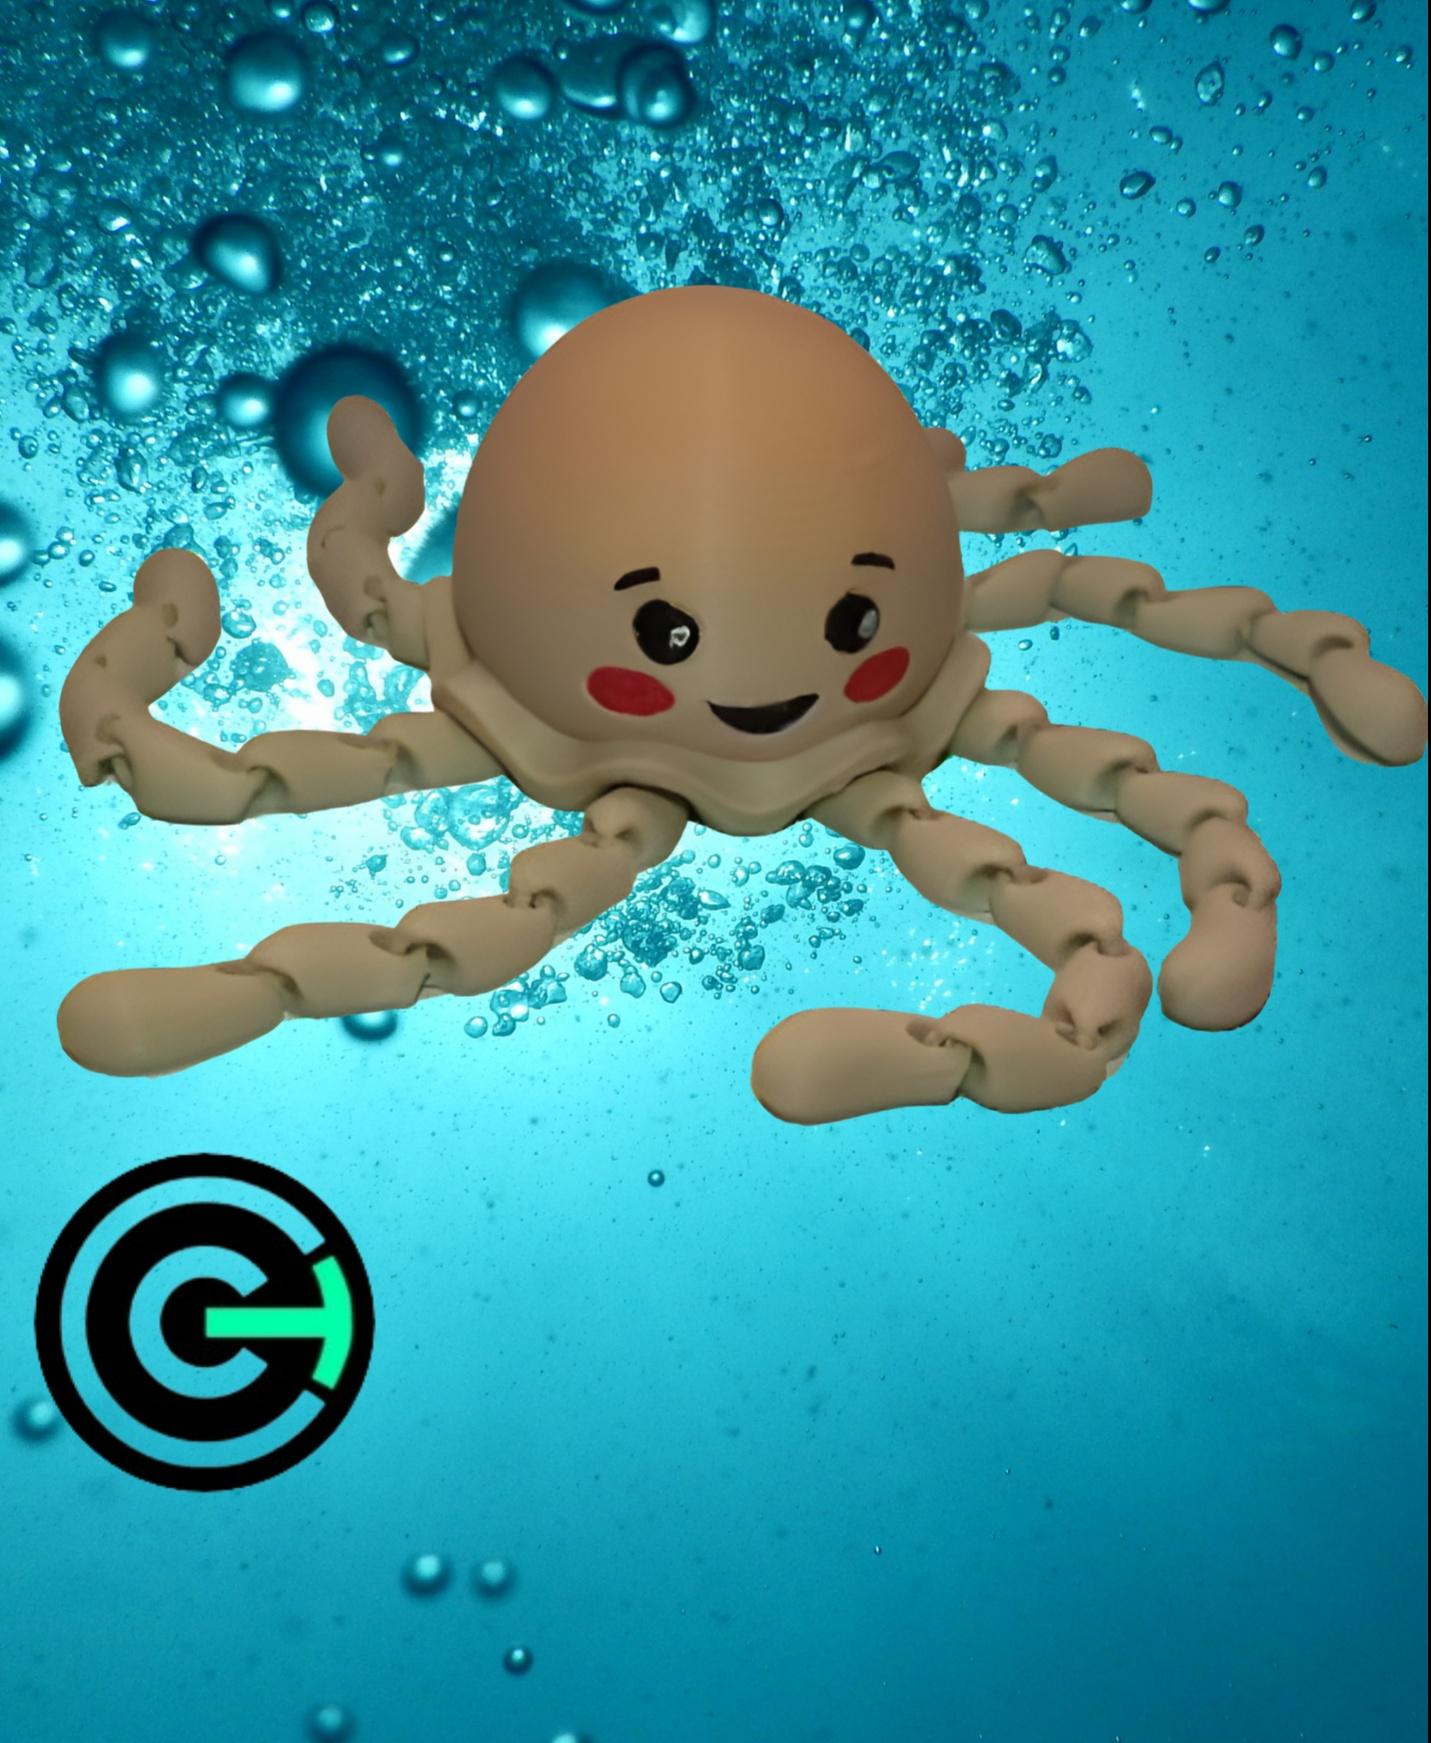 Jiggly Jellyfish (Articulated) - Are you ready for this jelly? - 3d model